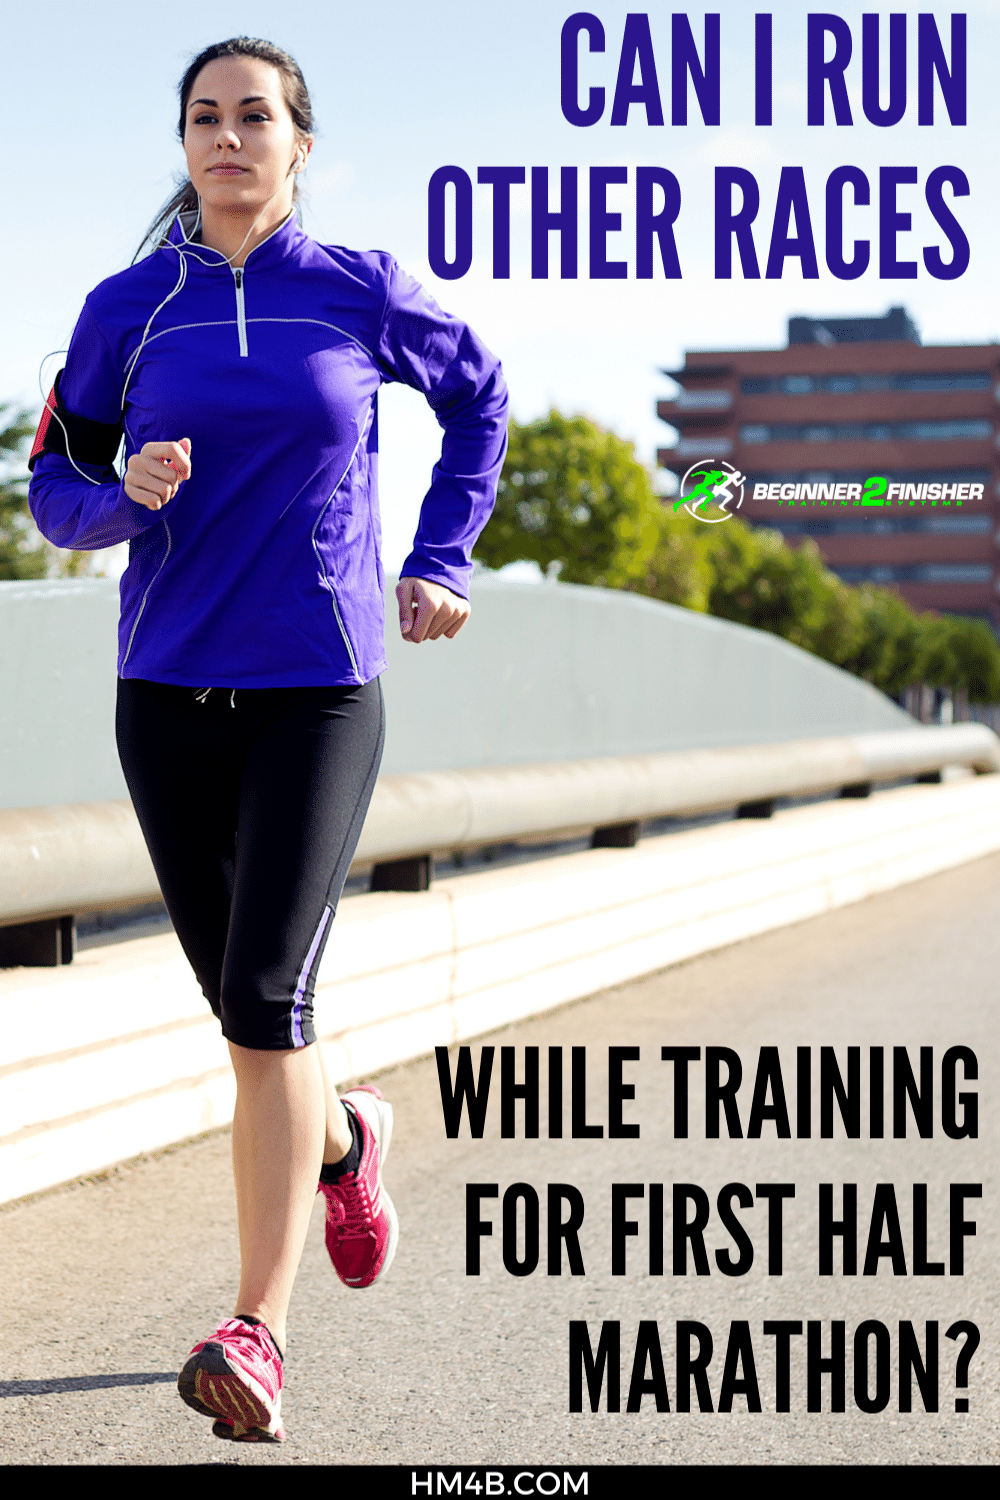 Can I run other races while training for first half marathon?